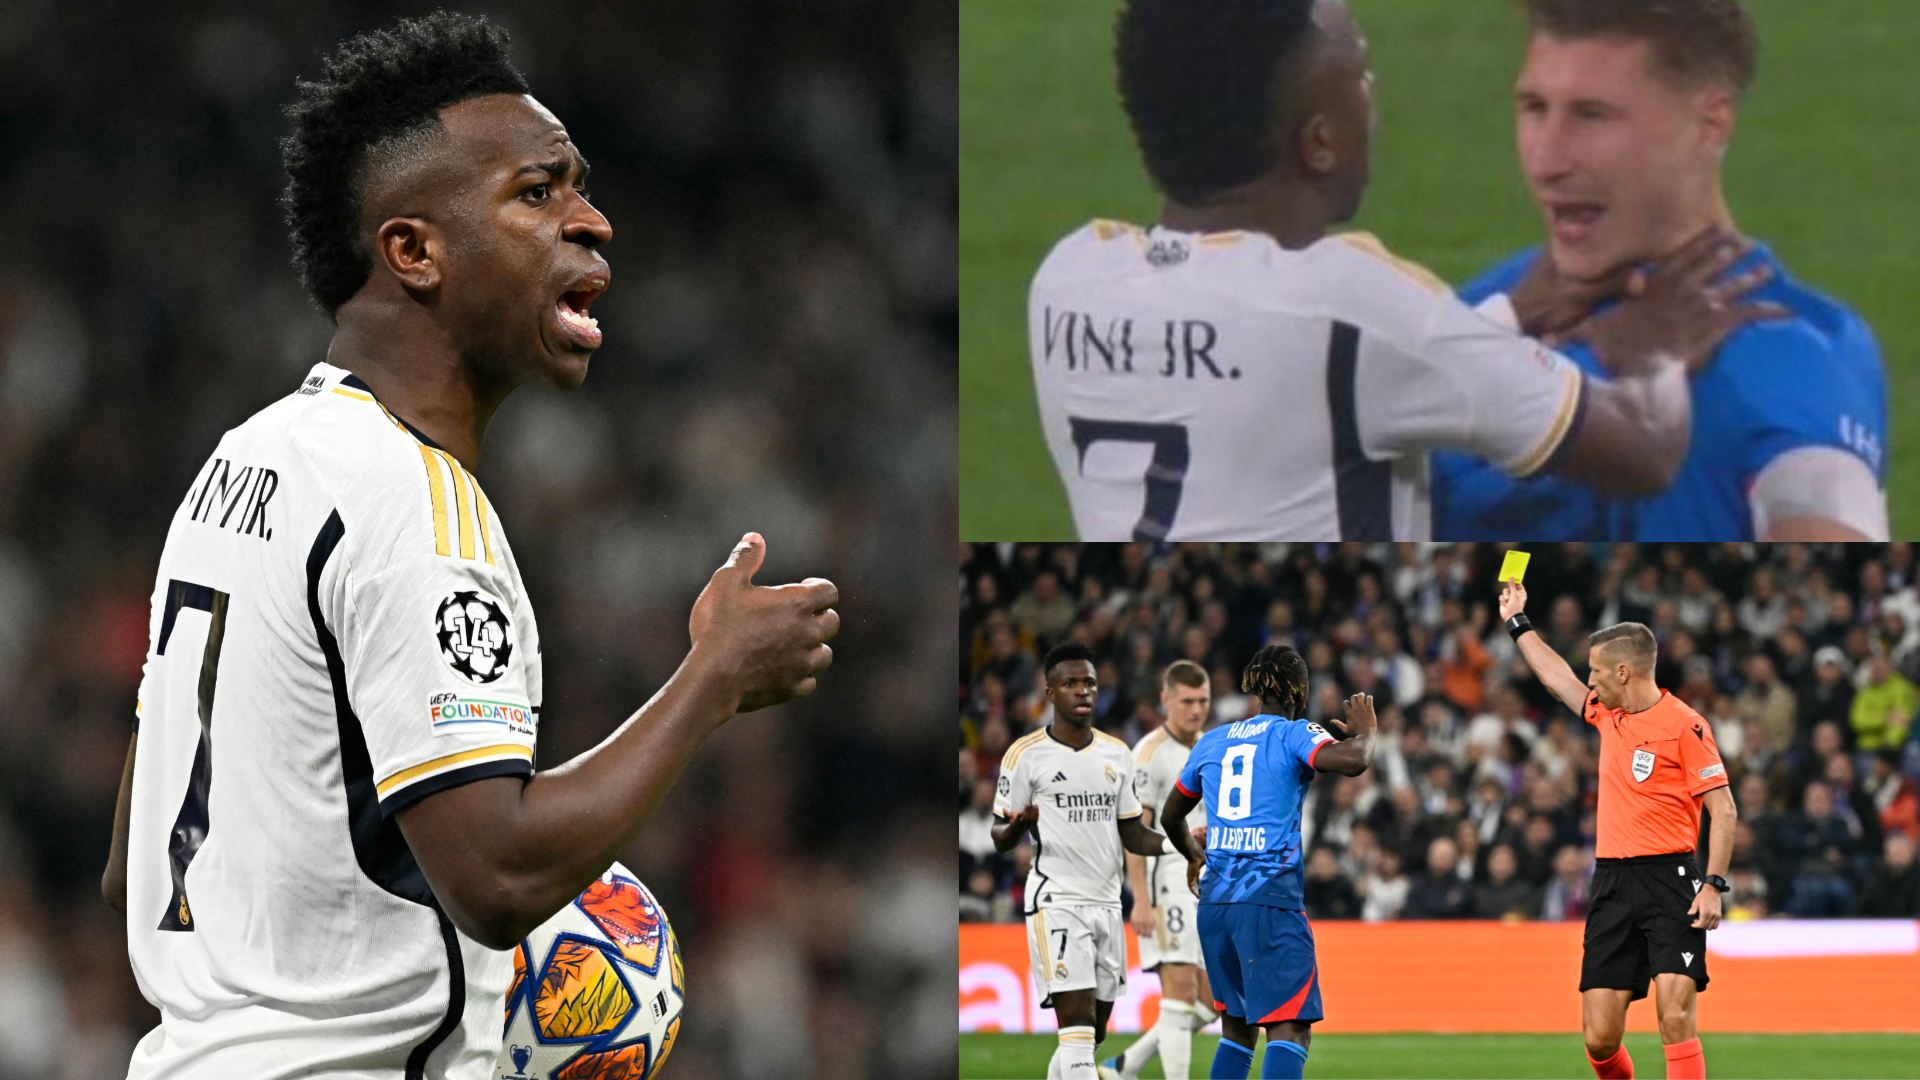 Don't pass to him' - How Vinicius Jr has overcome brutal put-down